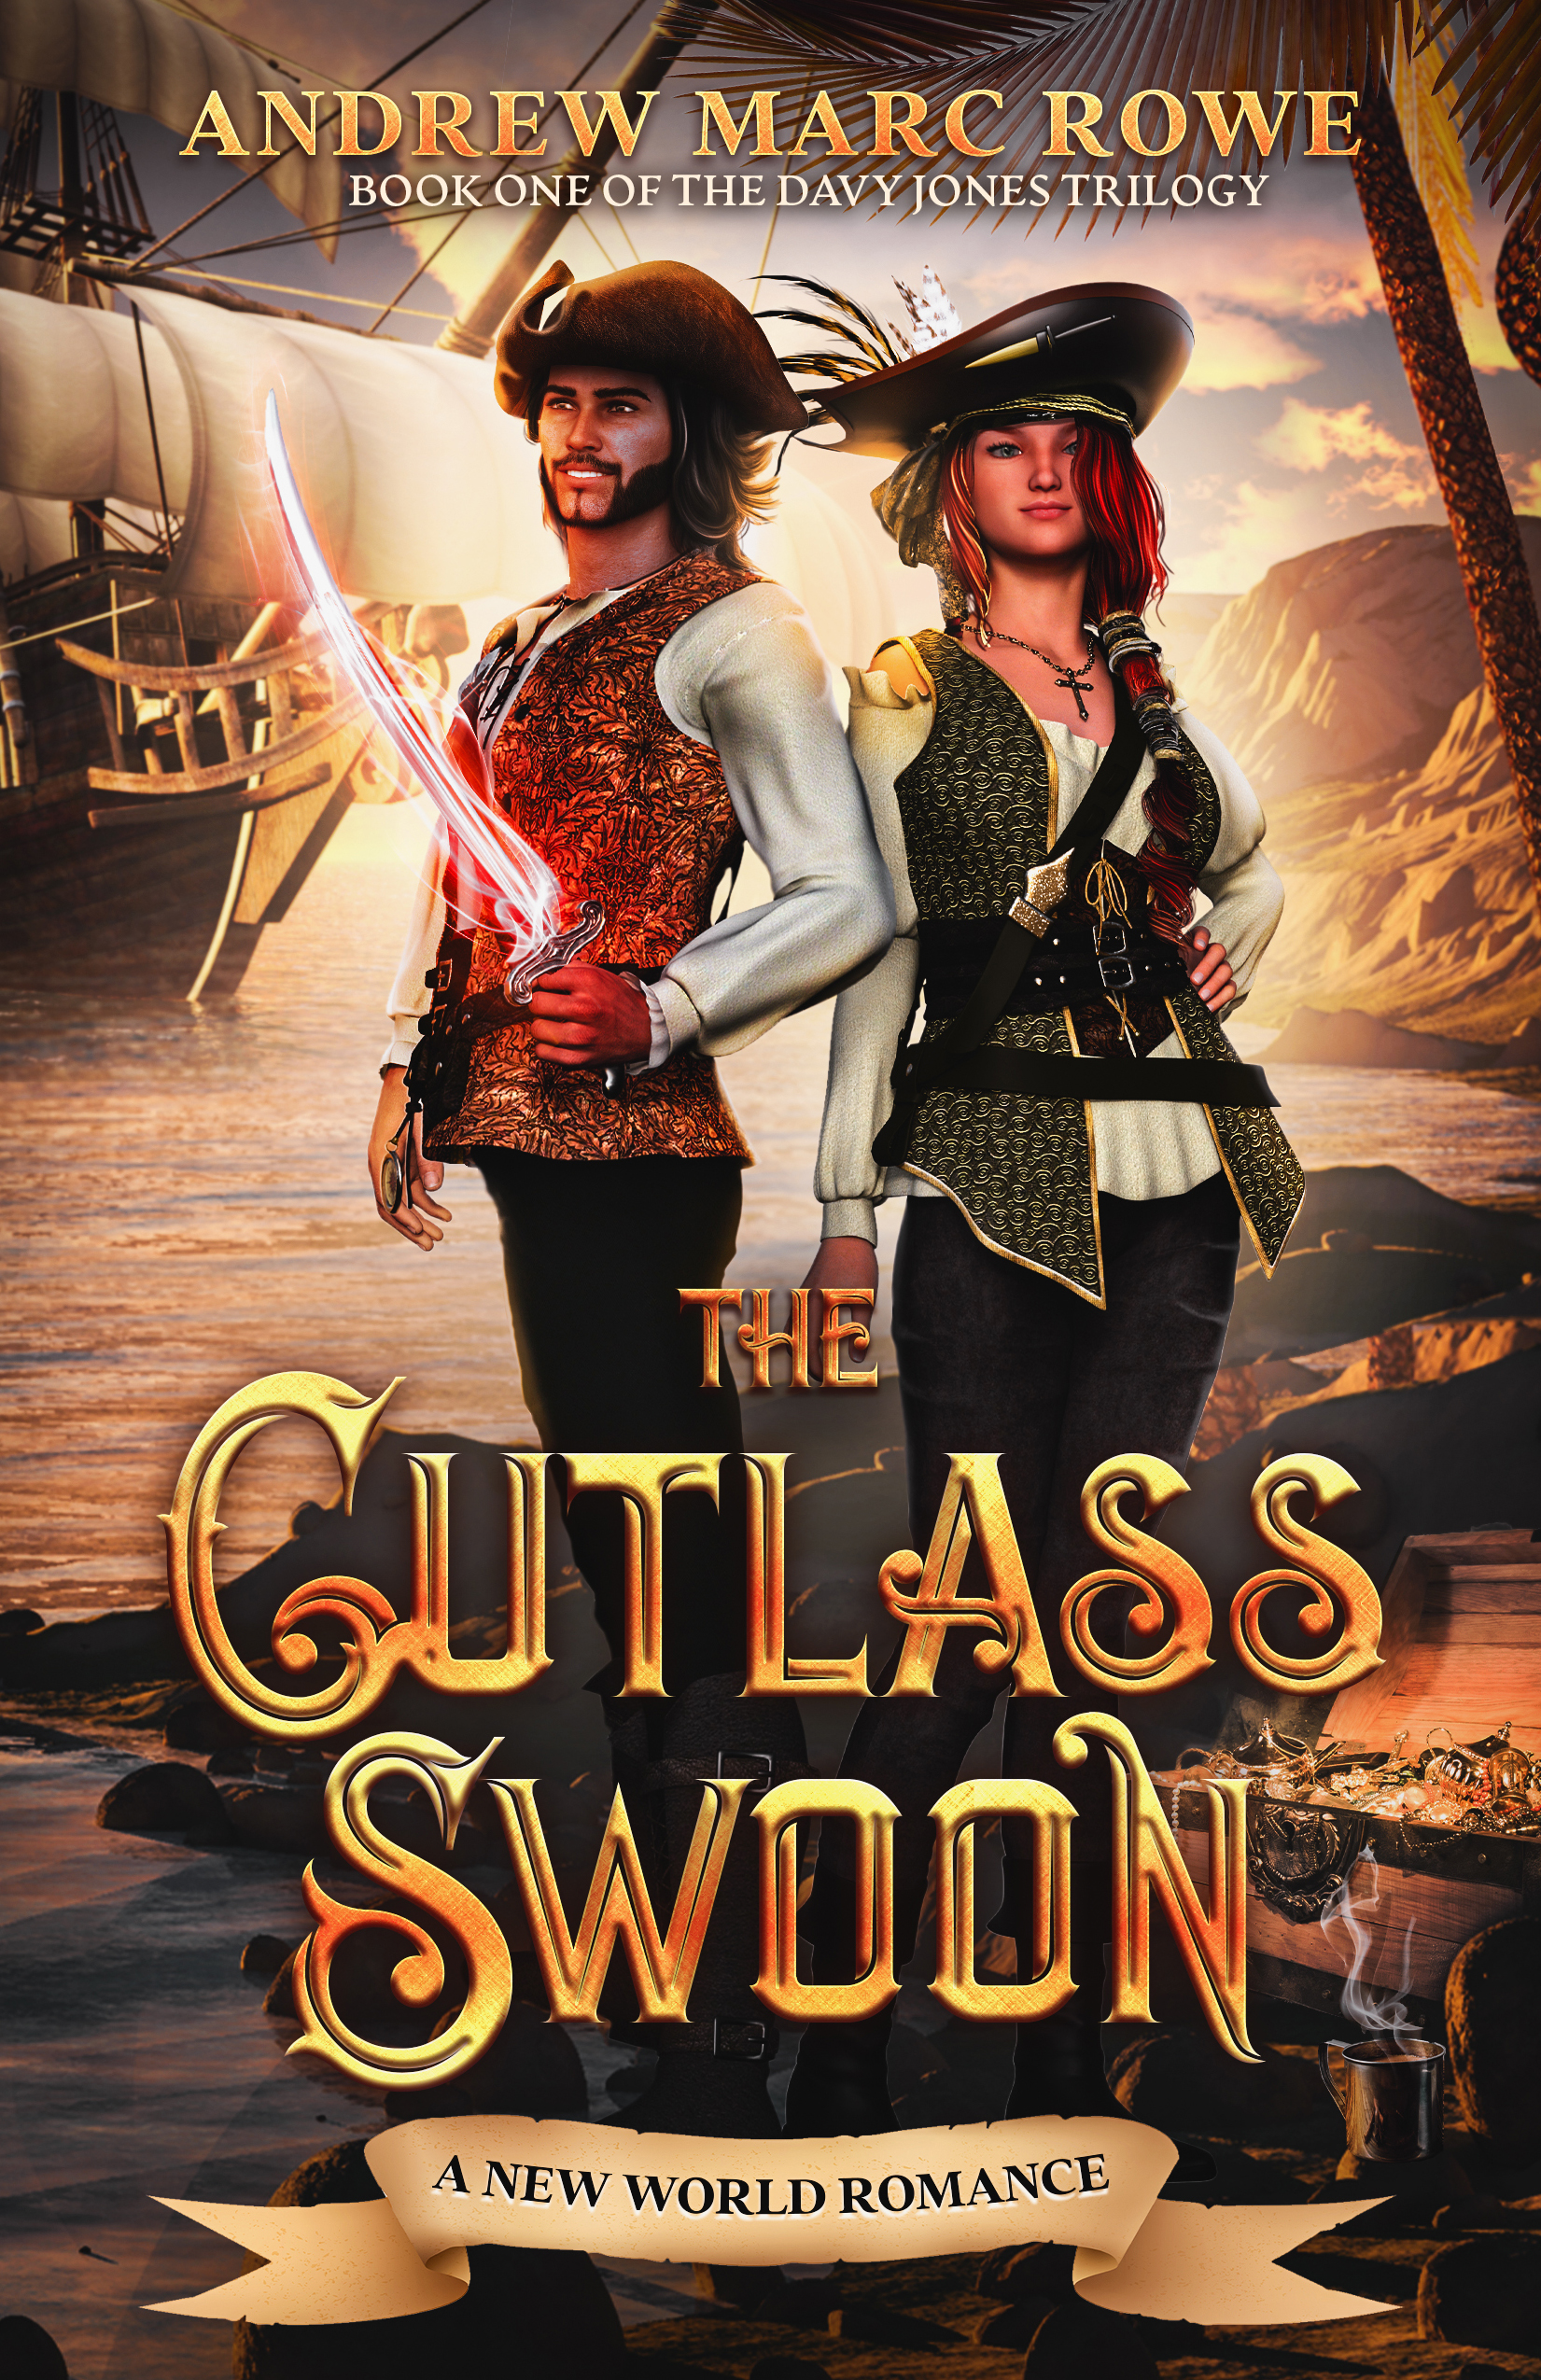 FREE: The Cutlass Swoon: A New World Romance by Andrew Marc Rowe